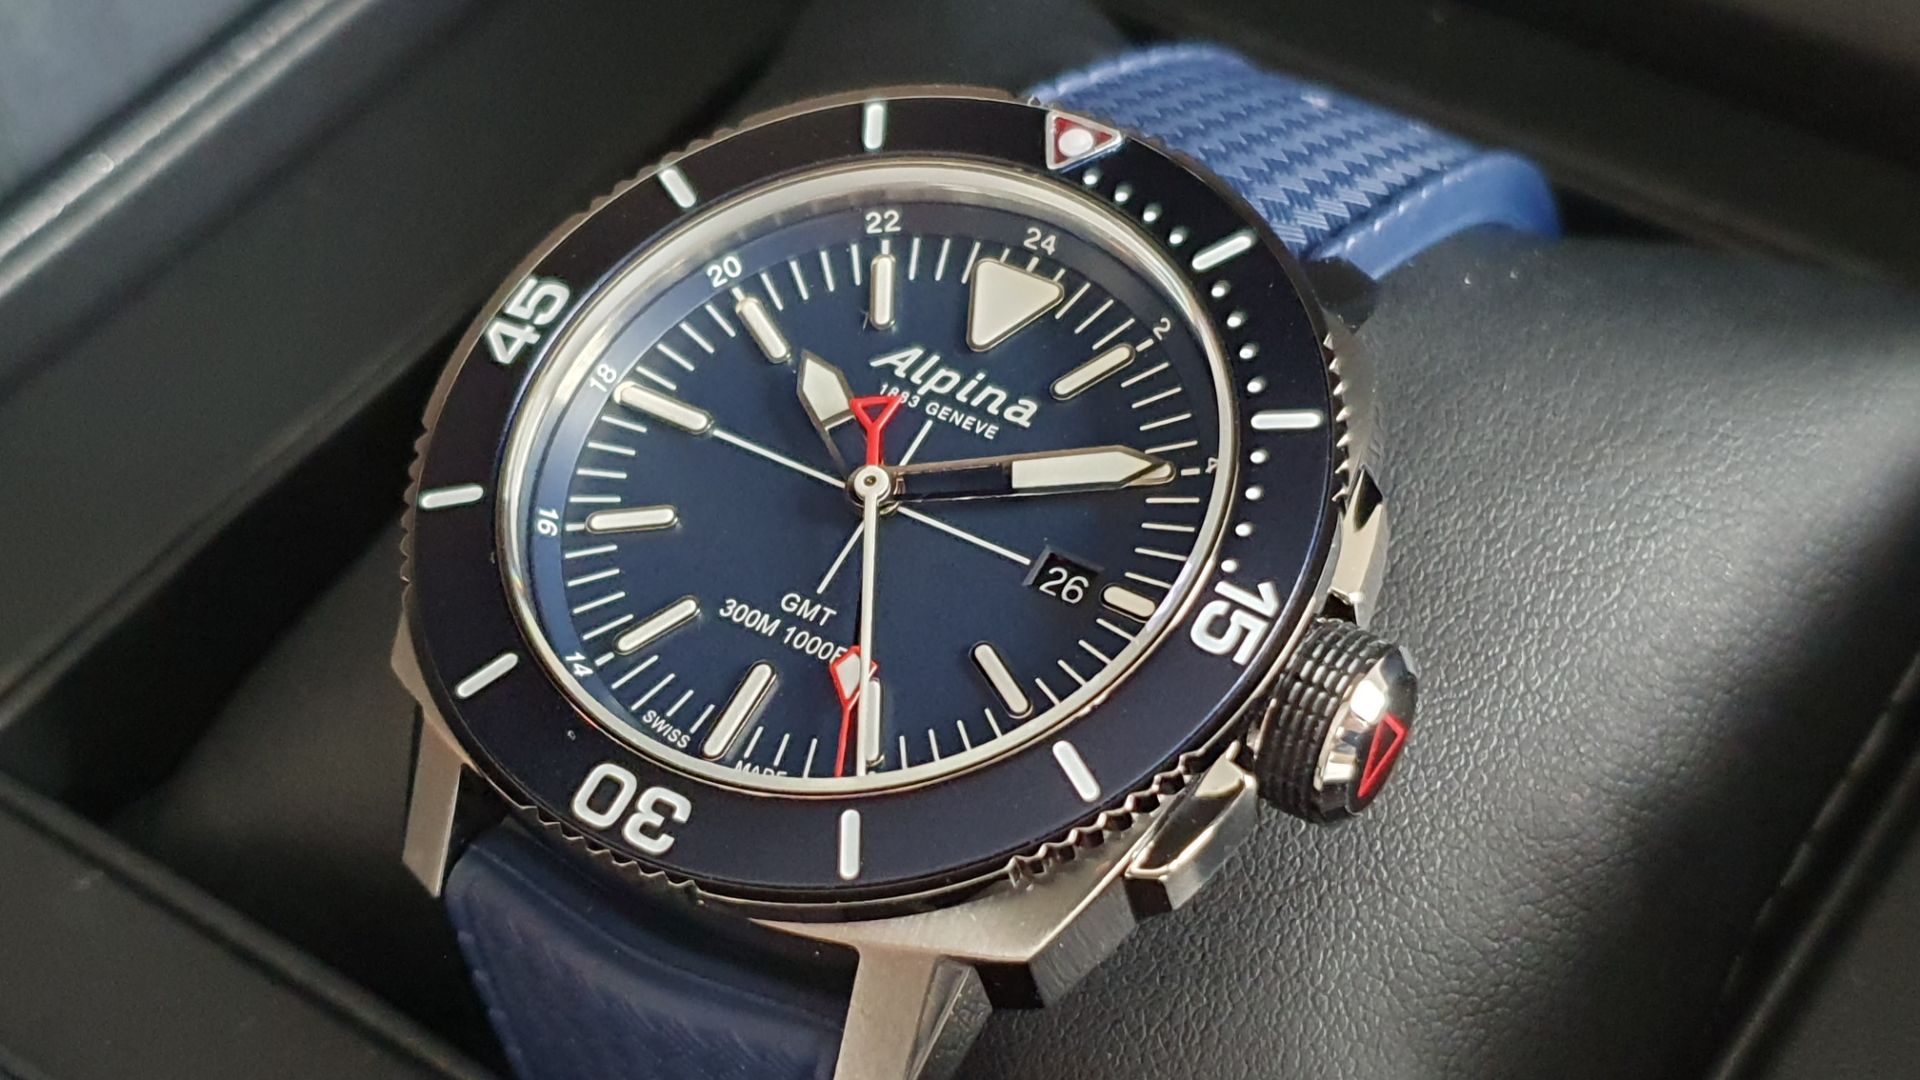 ALPINA Seastrong Diver 300 GMT SWISS MADE - Image 3 of 8